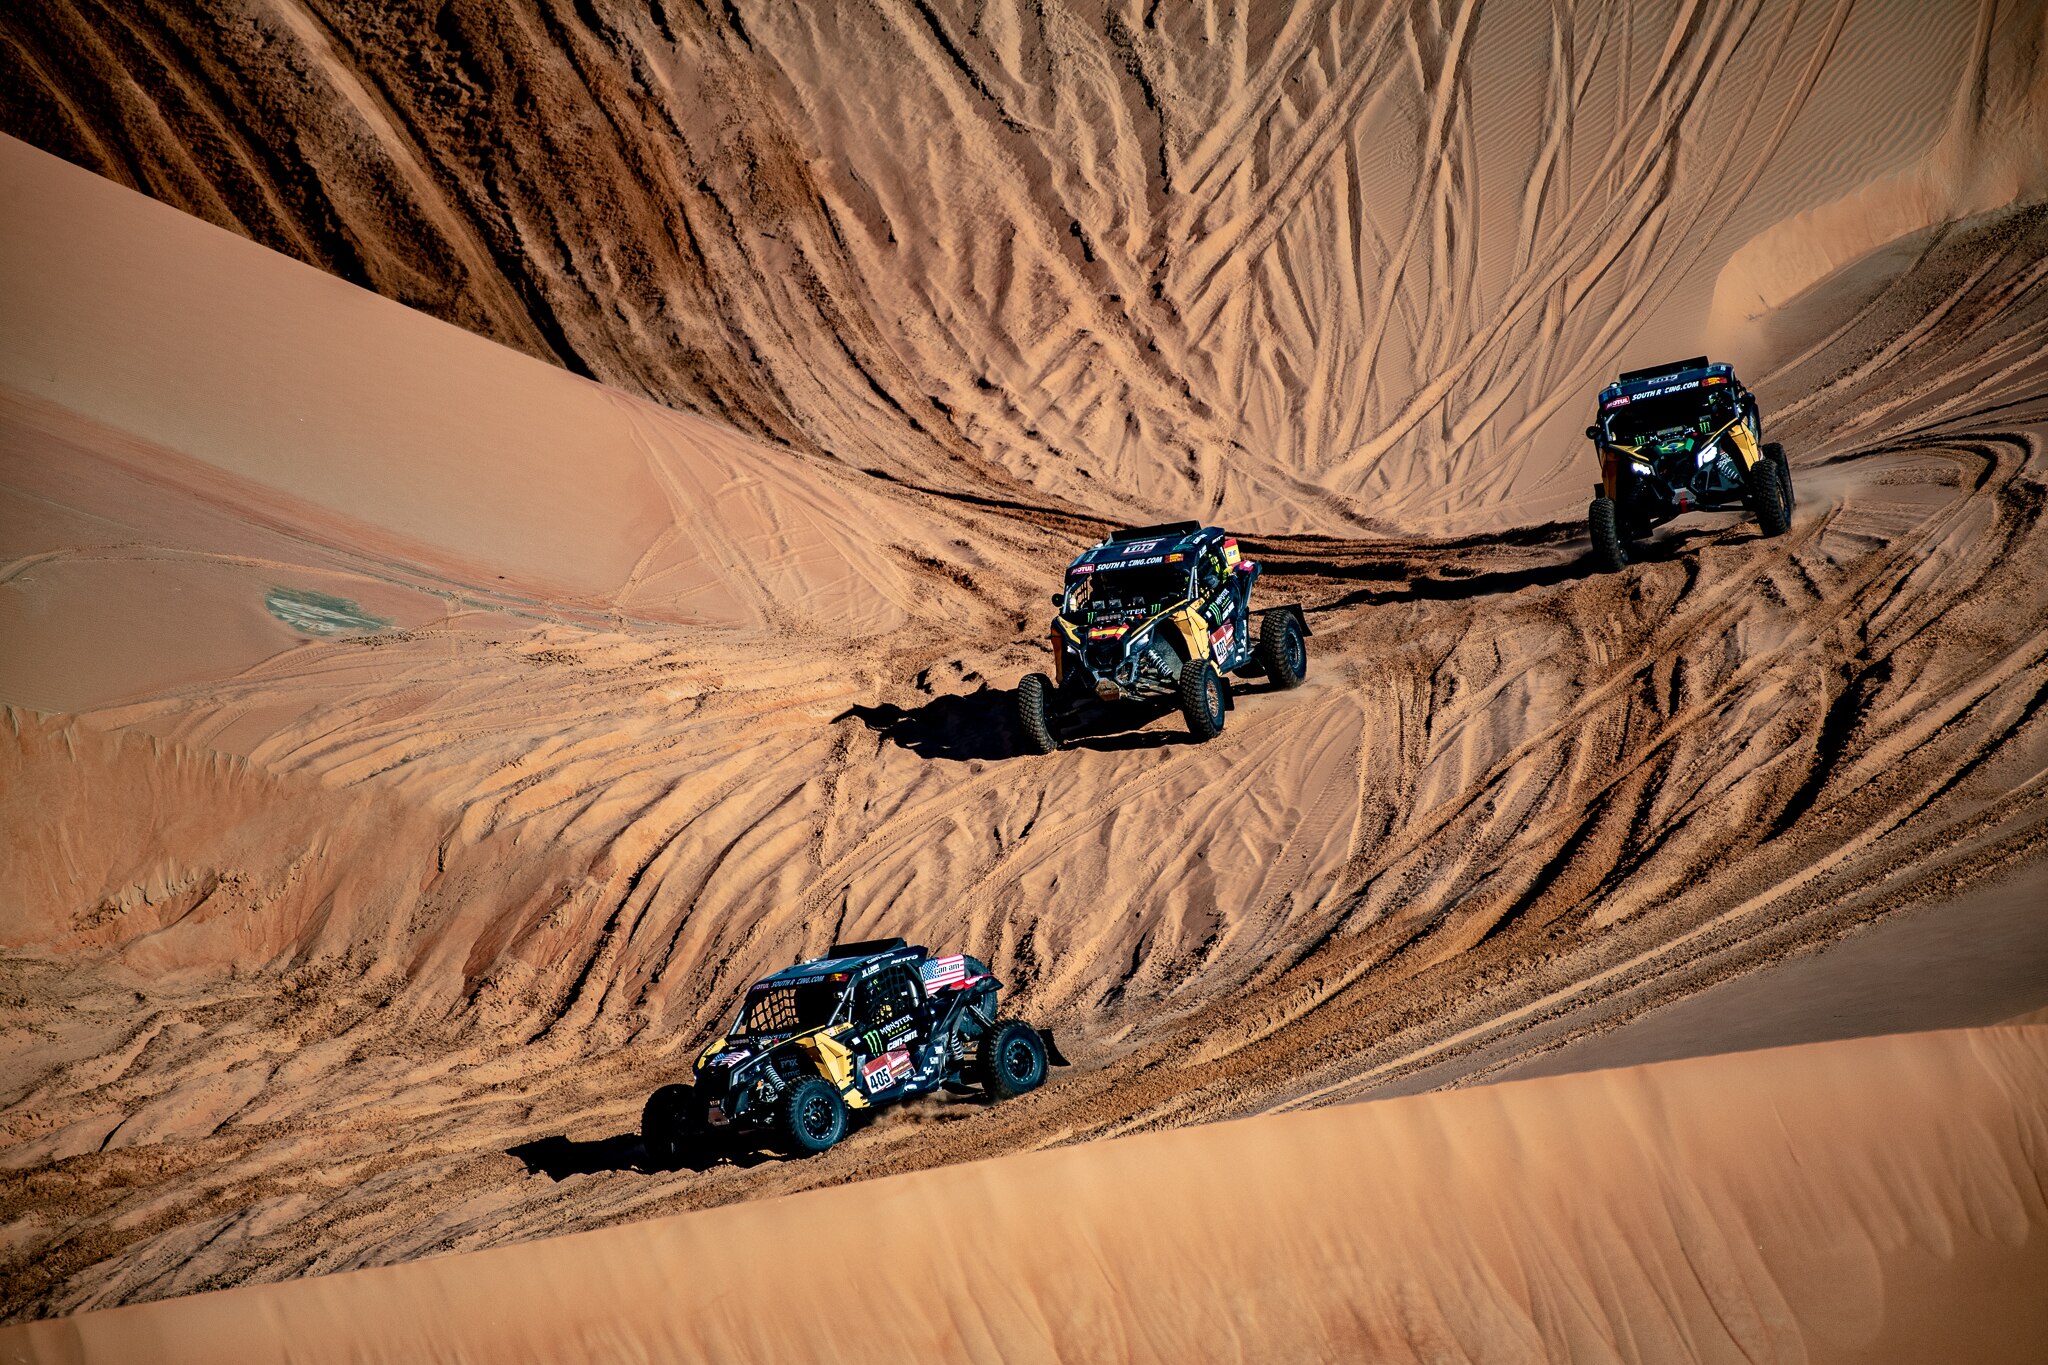 CAN-AM TEAM IS WINNING THE SSV CATEGORY AT DAKAR RALLY 2020!